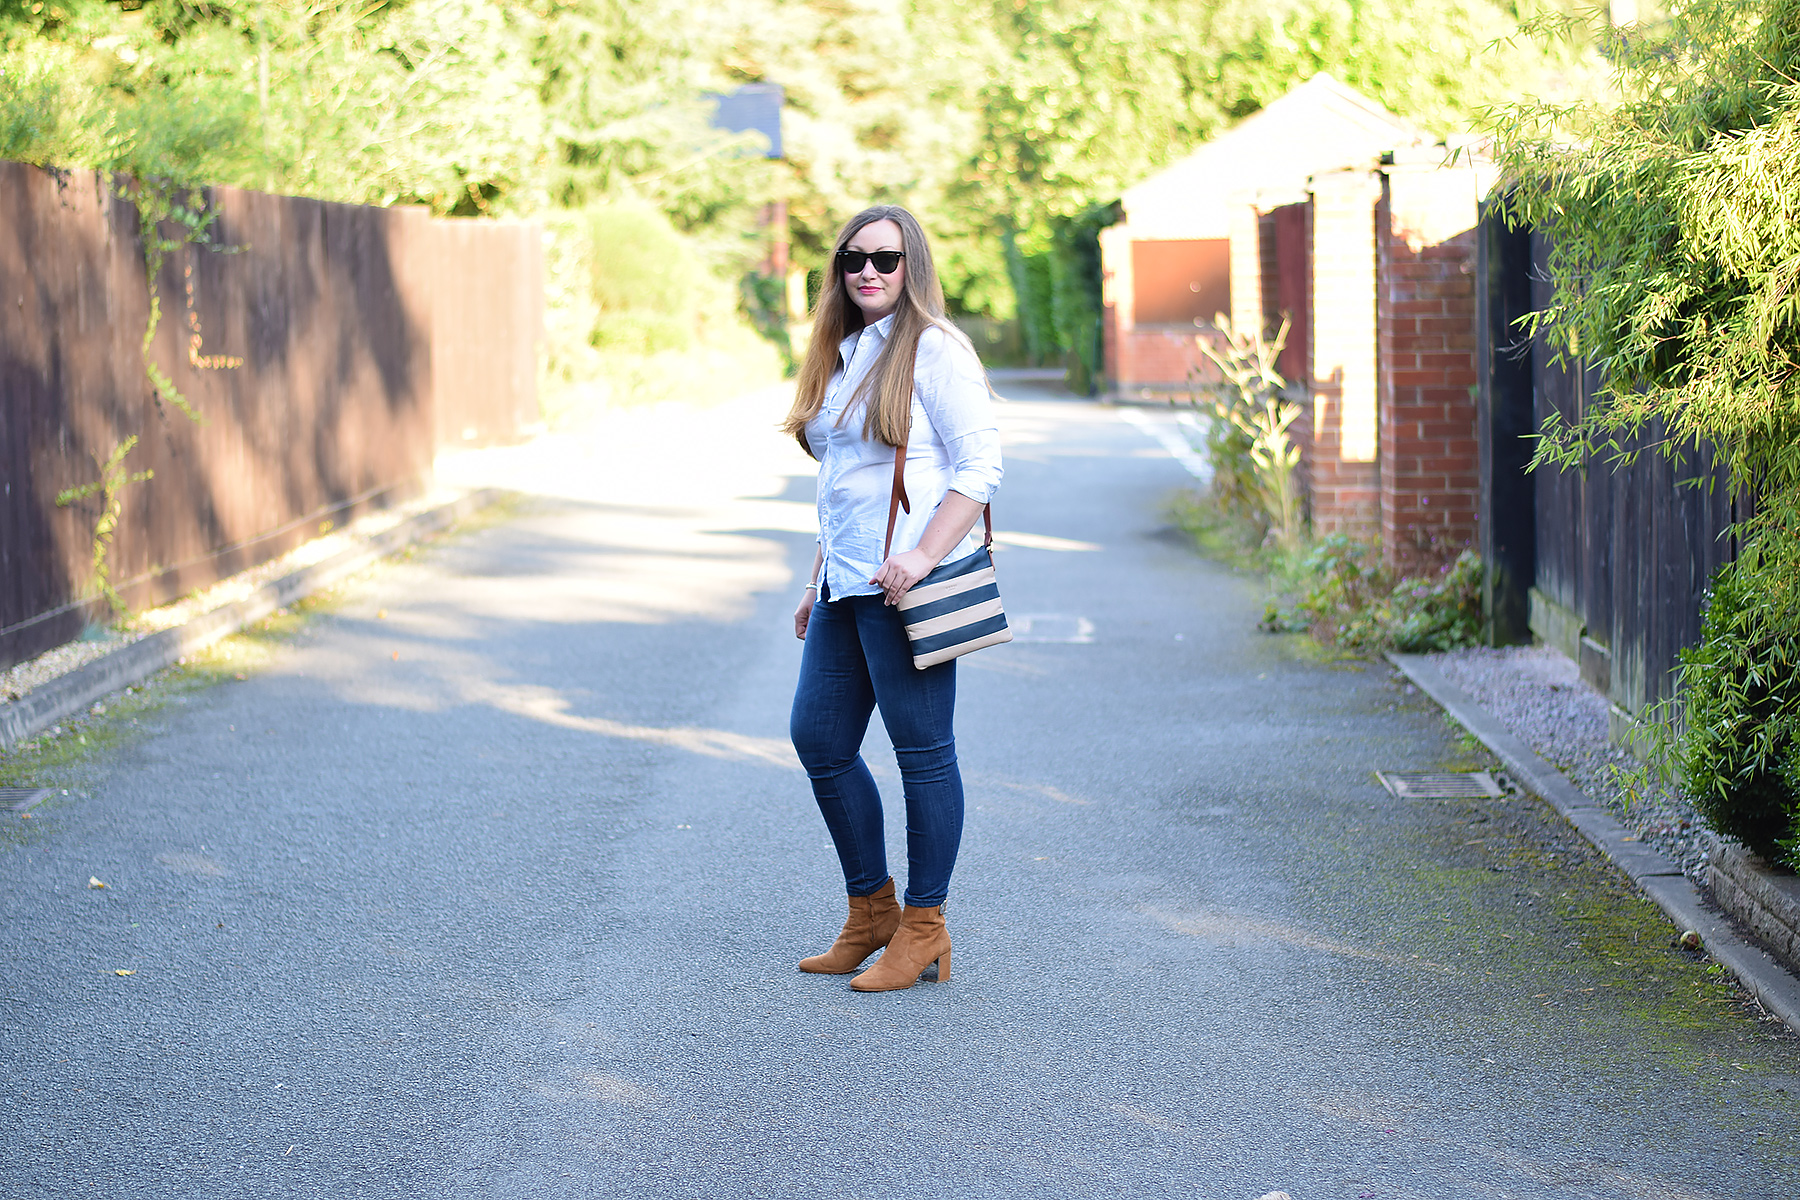 Gemma From Jacquard Flower UK Fashion blog wearing a classic style outfit and striped bag